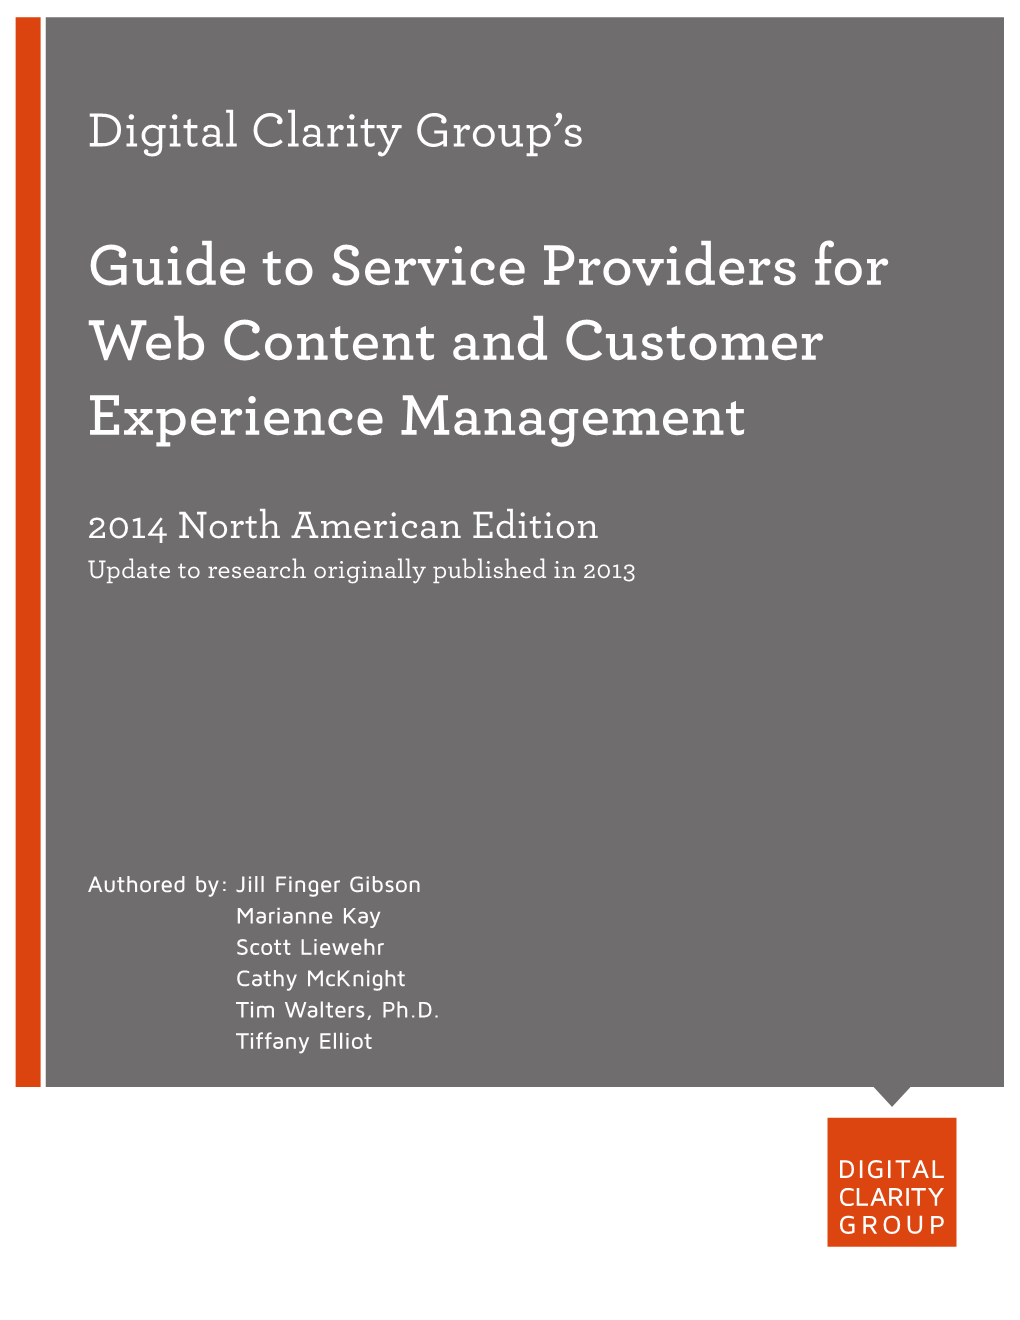 Guide to Service Providers for Web Content and Customer Experience Management